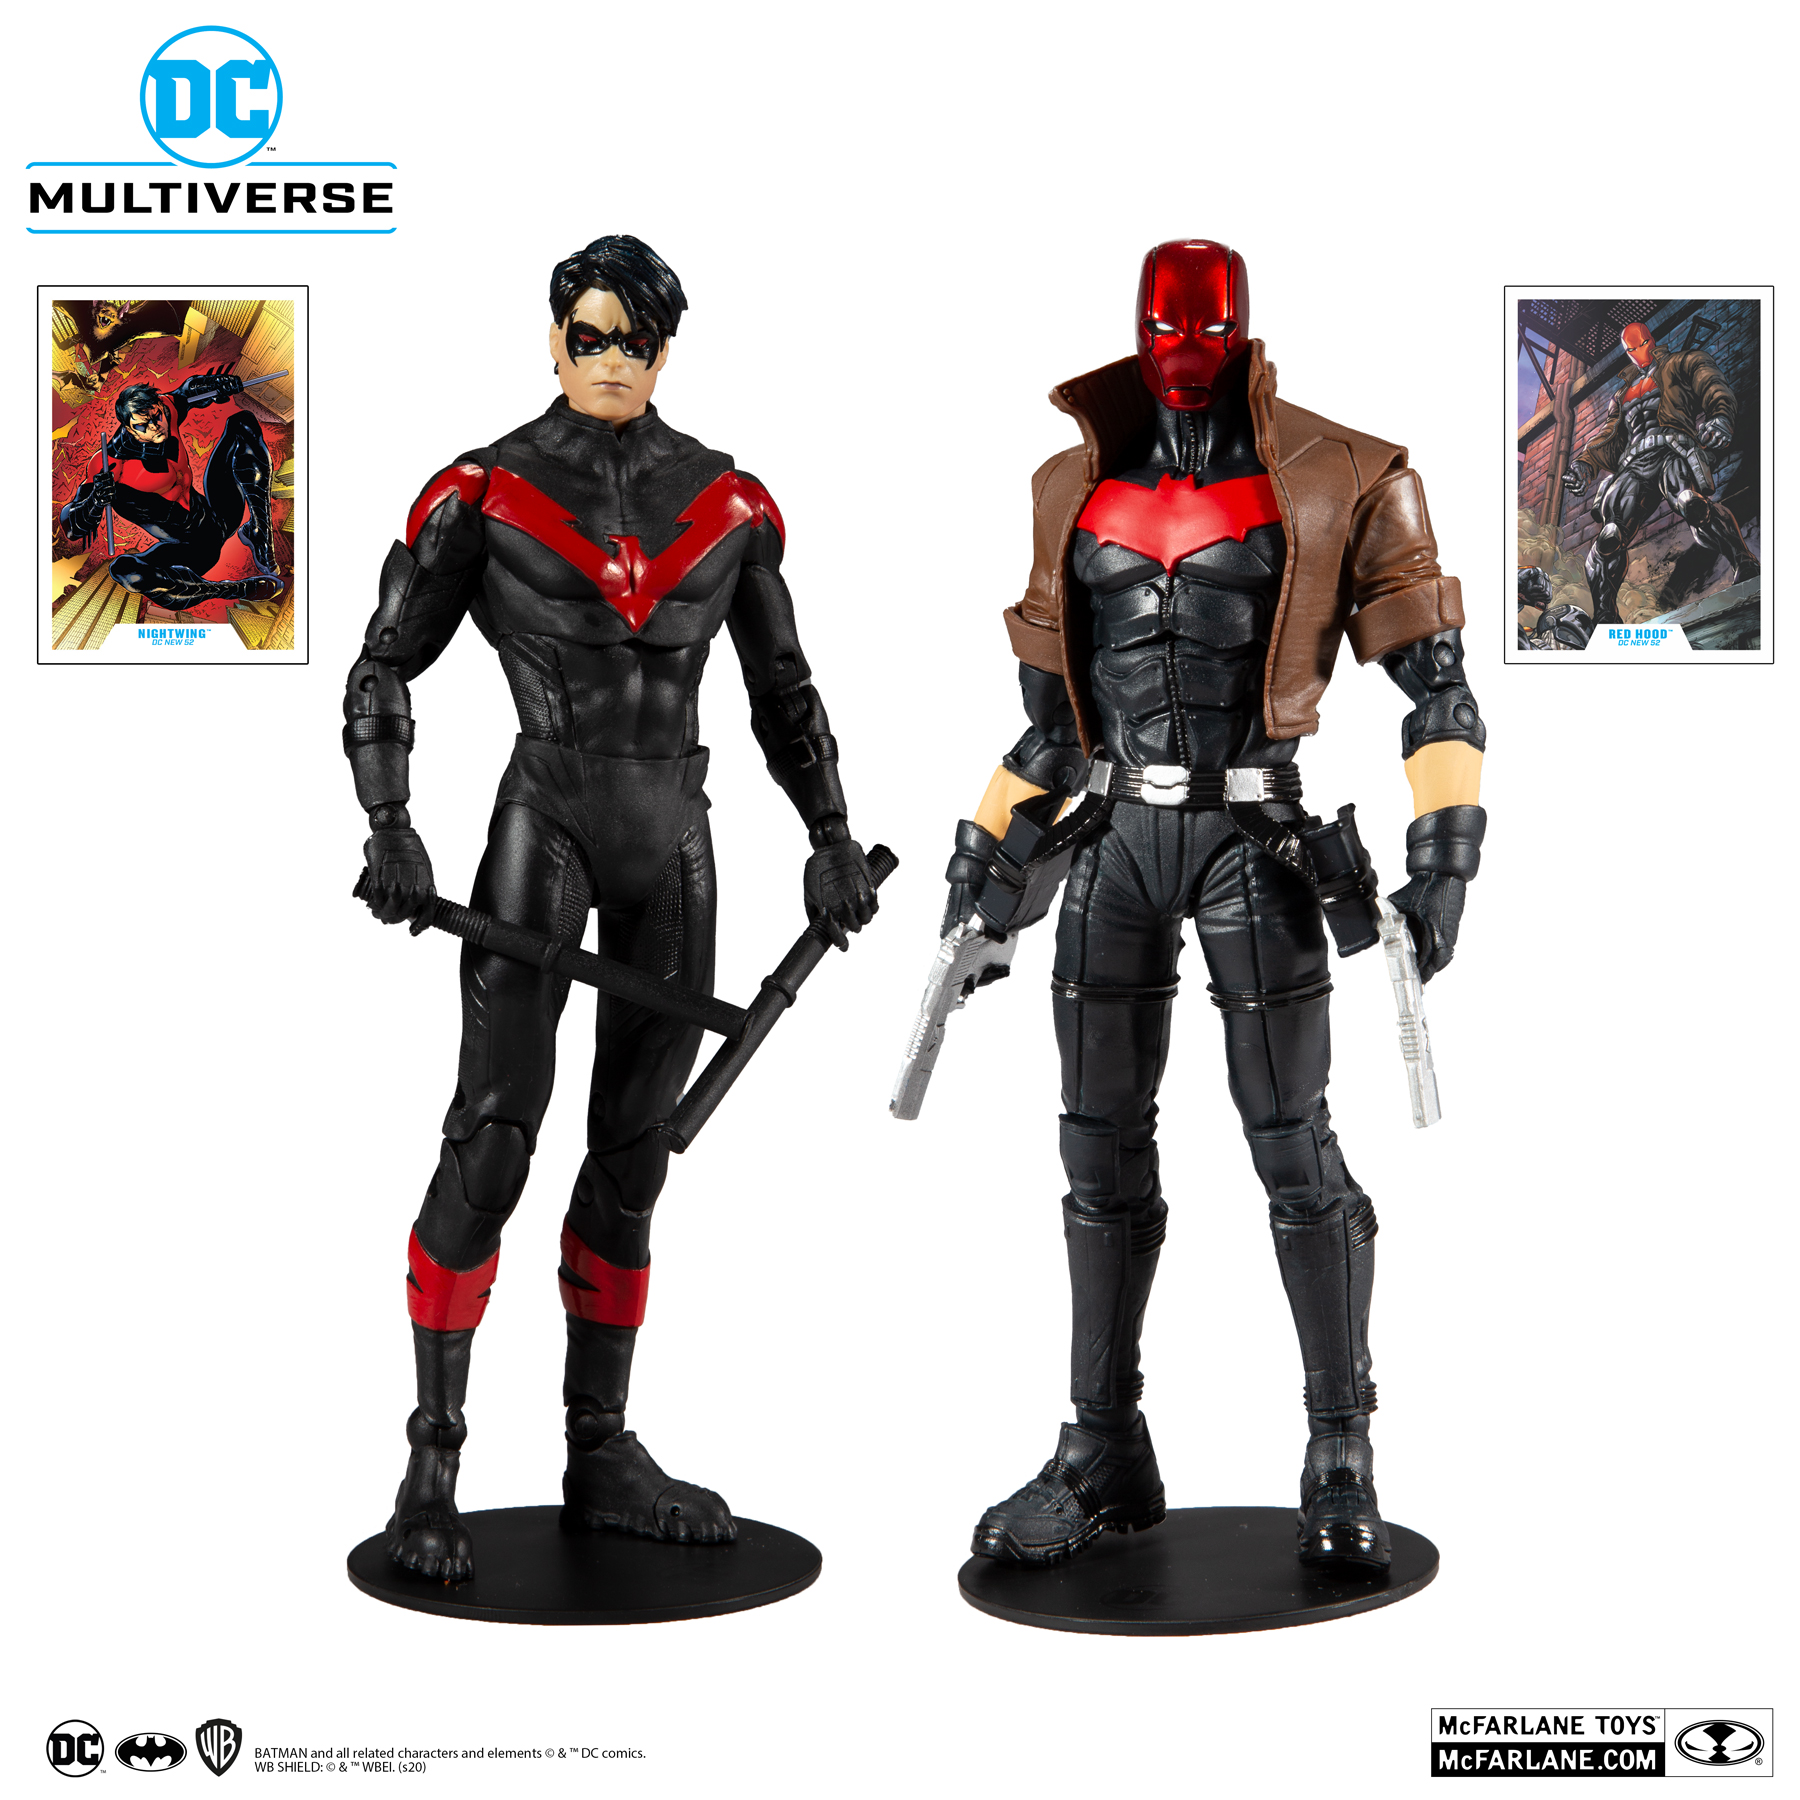 McFarlane Toys DC Multiverse Red Hood 7" Action Figure for sale online 